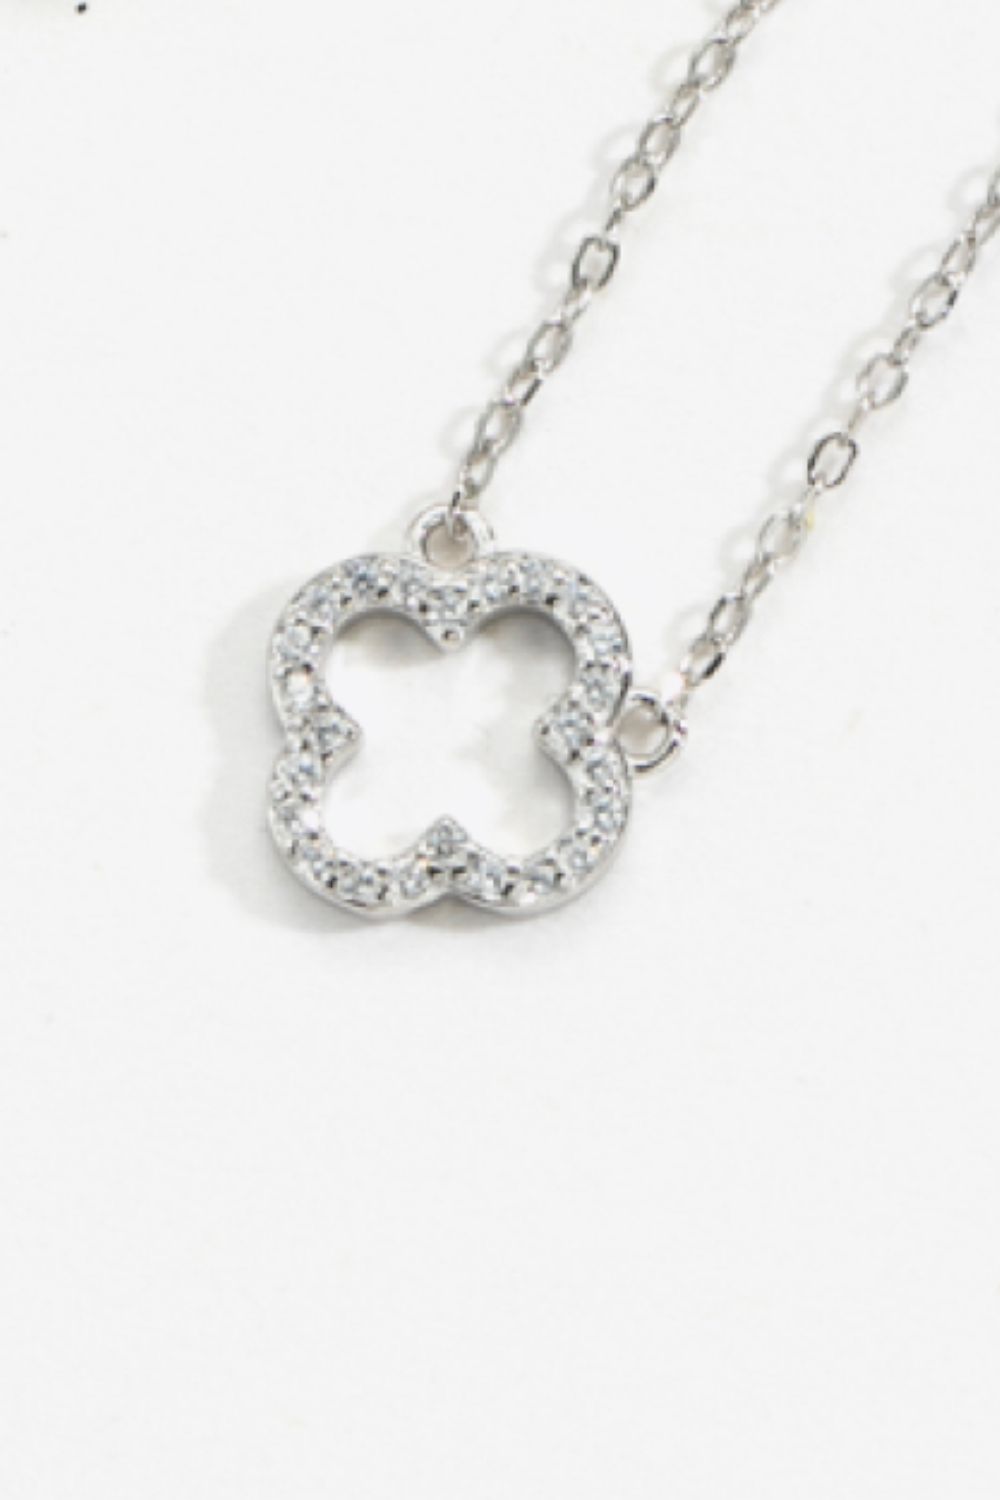 Inlaid Cubic Zirconia 925 Sterling Silver Necklace - 2 options - necklace at TFC&H Co.